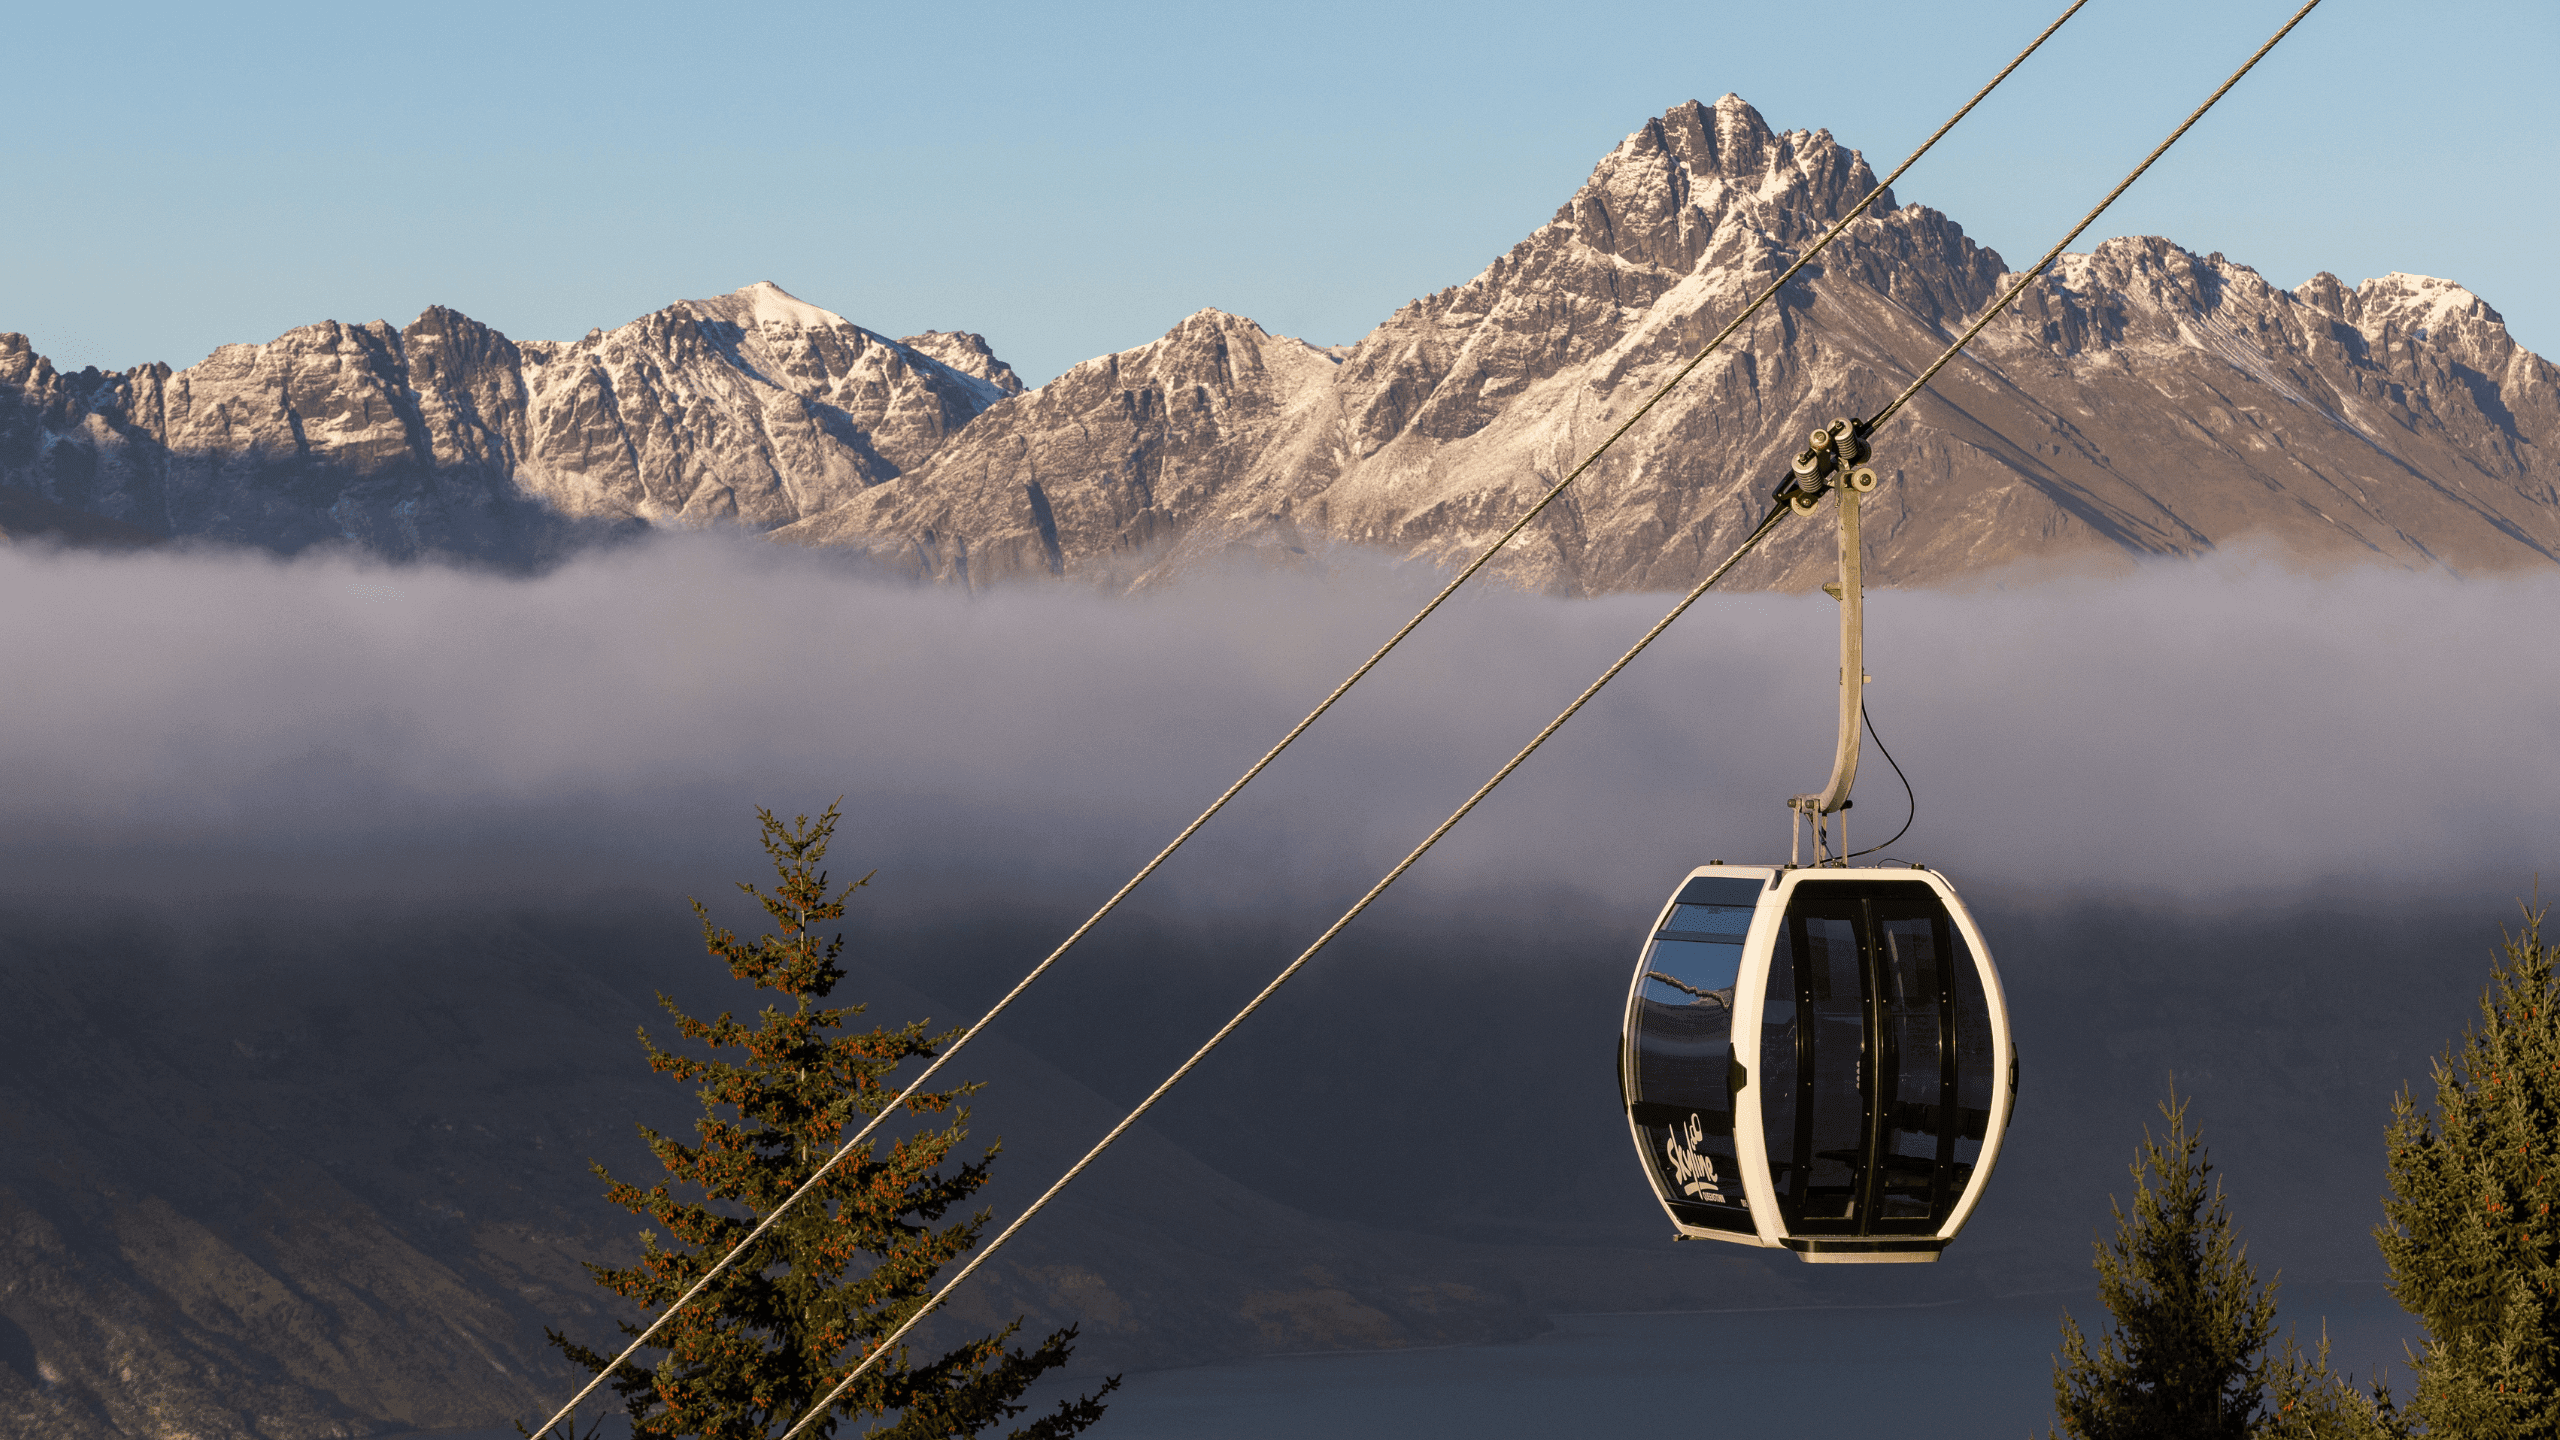 View of the Gondola going up in Queenstown, over the treetops